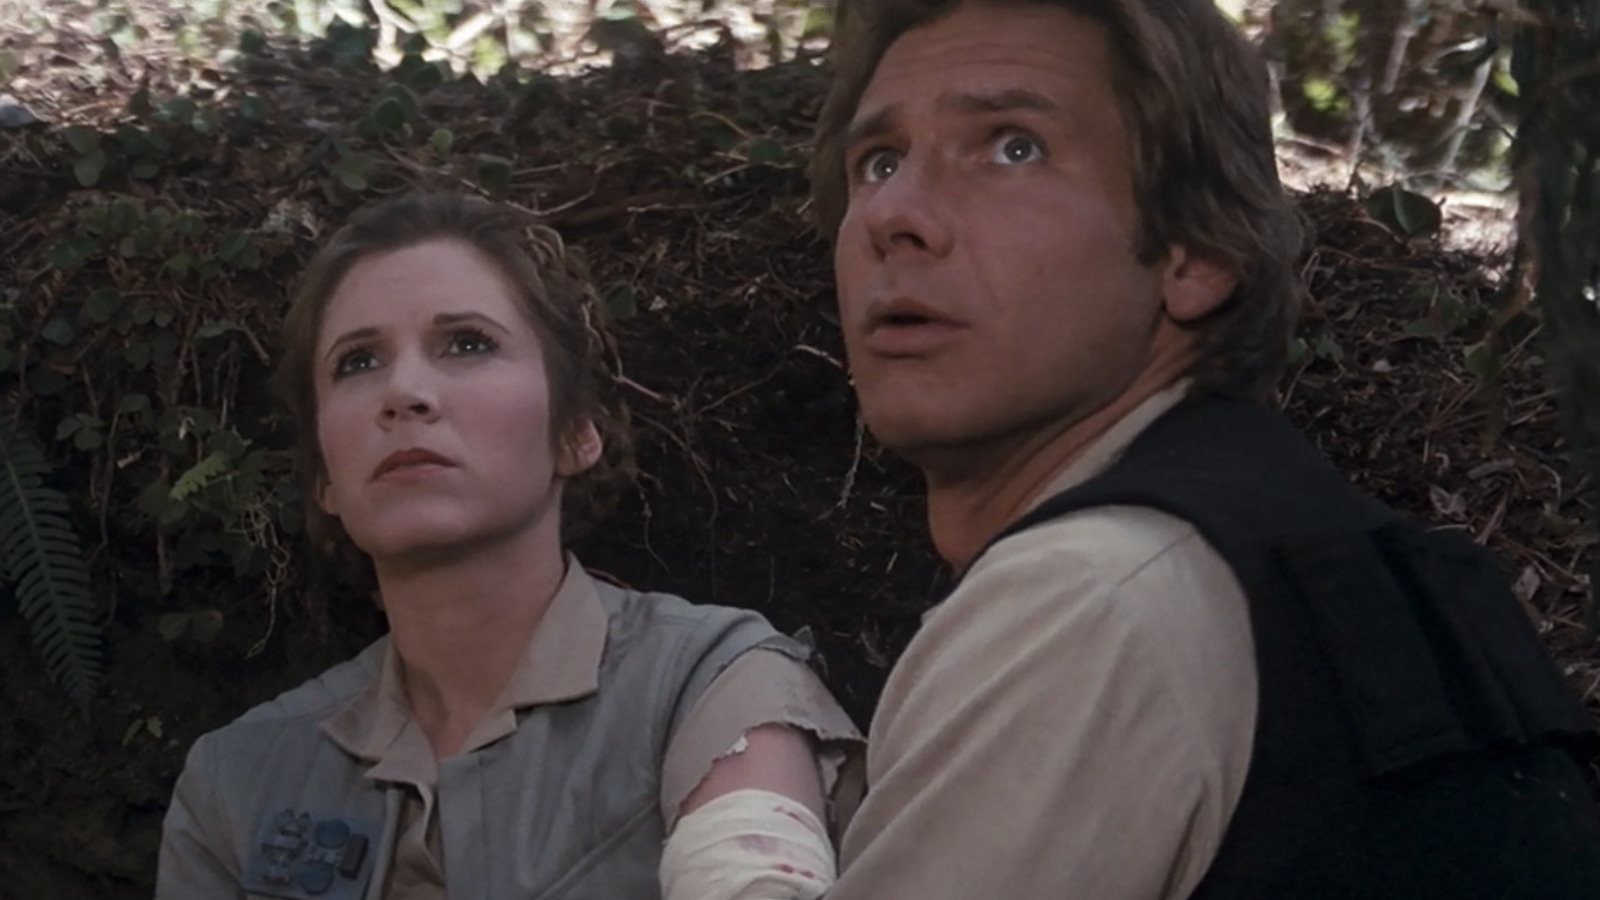 #You’re Cordially Invited To An Upcoming Star Wars Novel About Han And Leia’s Wedding